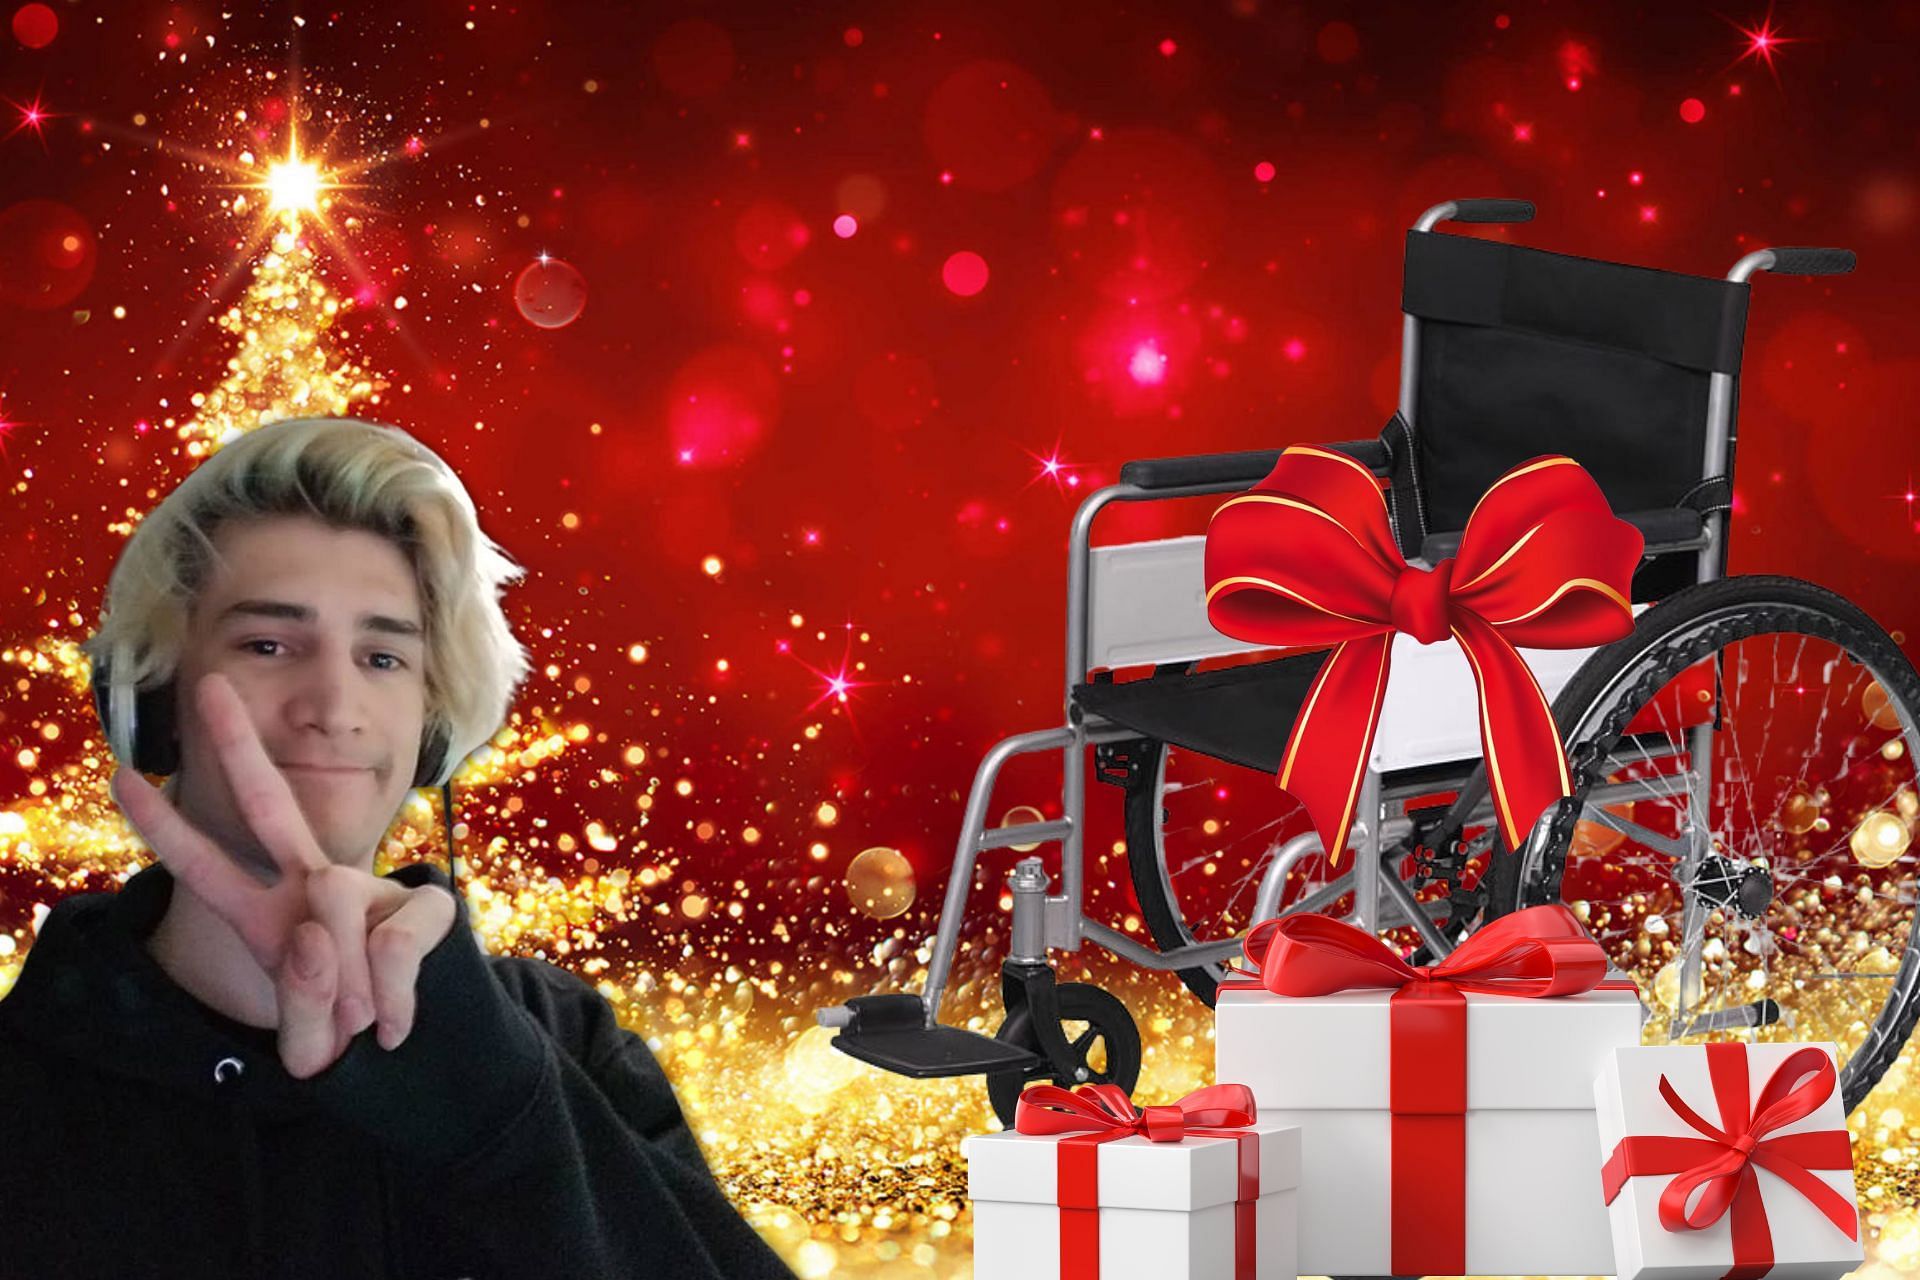 xQc reacts to an emotional thank you message from a viewer (Image via SportsKeeda)